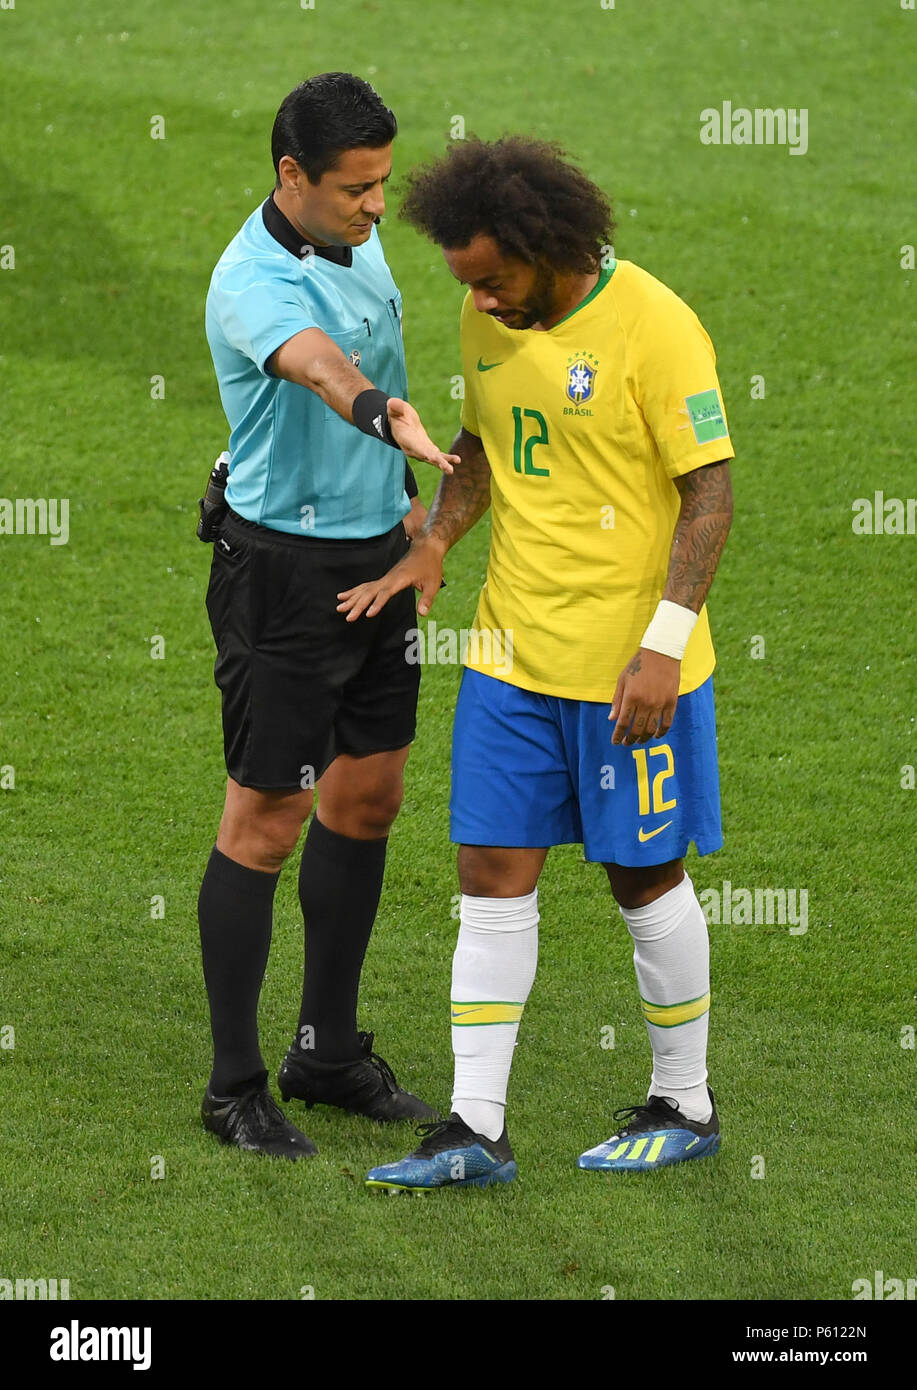 Moscow, Russia. 27th June, 2018. Marcelo (R) of Brazil is substituted off after his injury during the 2018 FIFA World Cup Group E match between Brazil and Serbia in Moscow, Russia, June 27, 2018. Credit: Cao Can/Xinhua/Alamy Live News Stock Photo